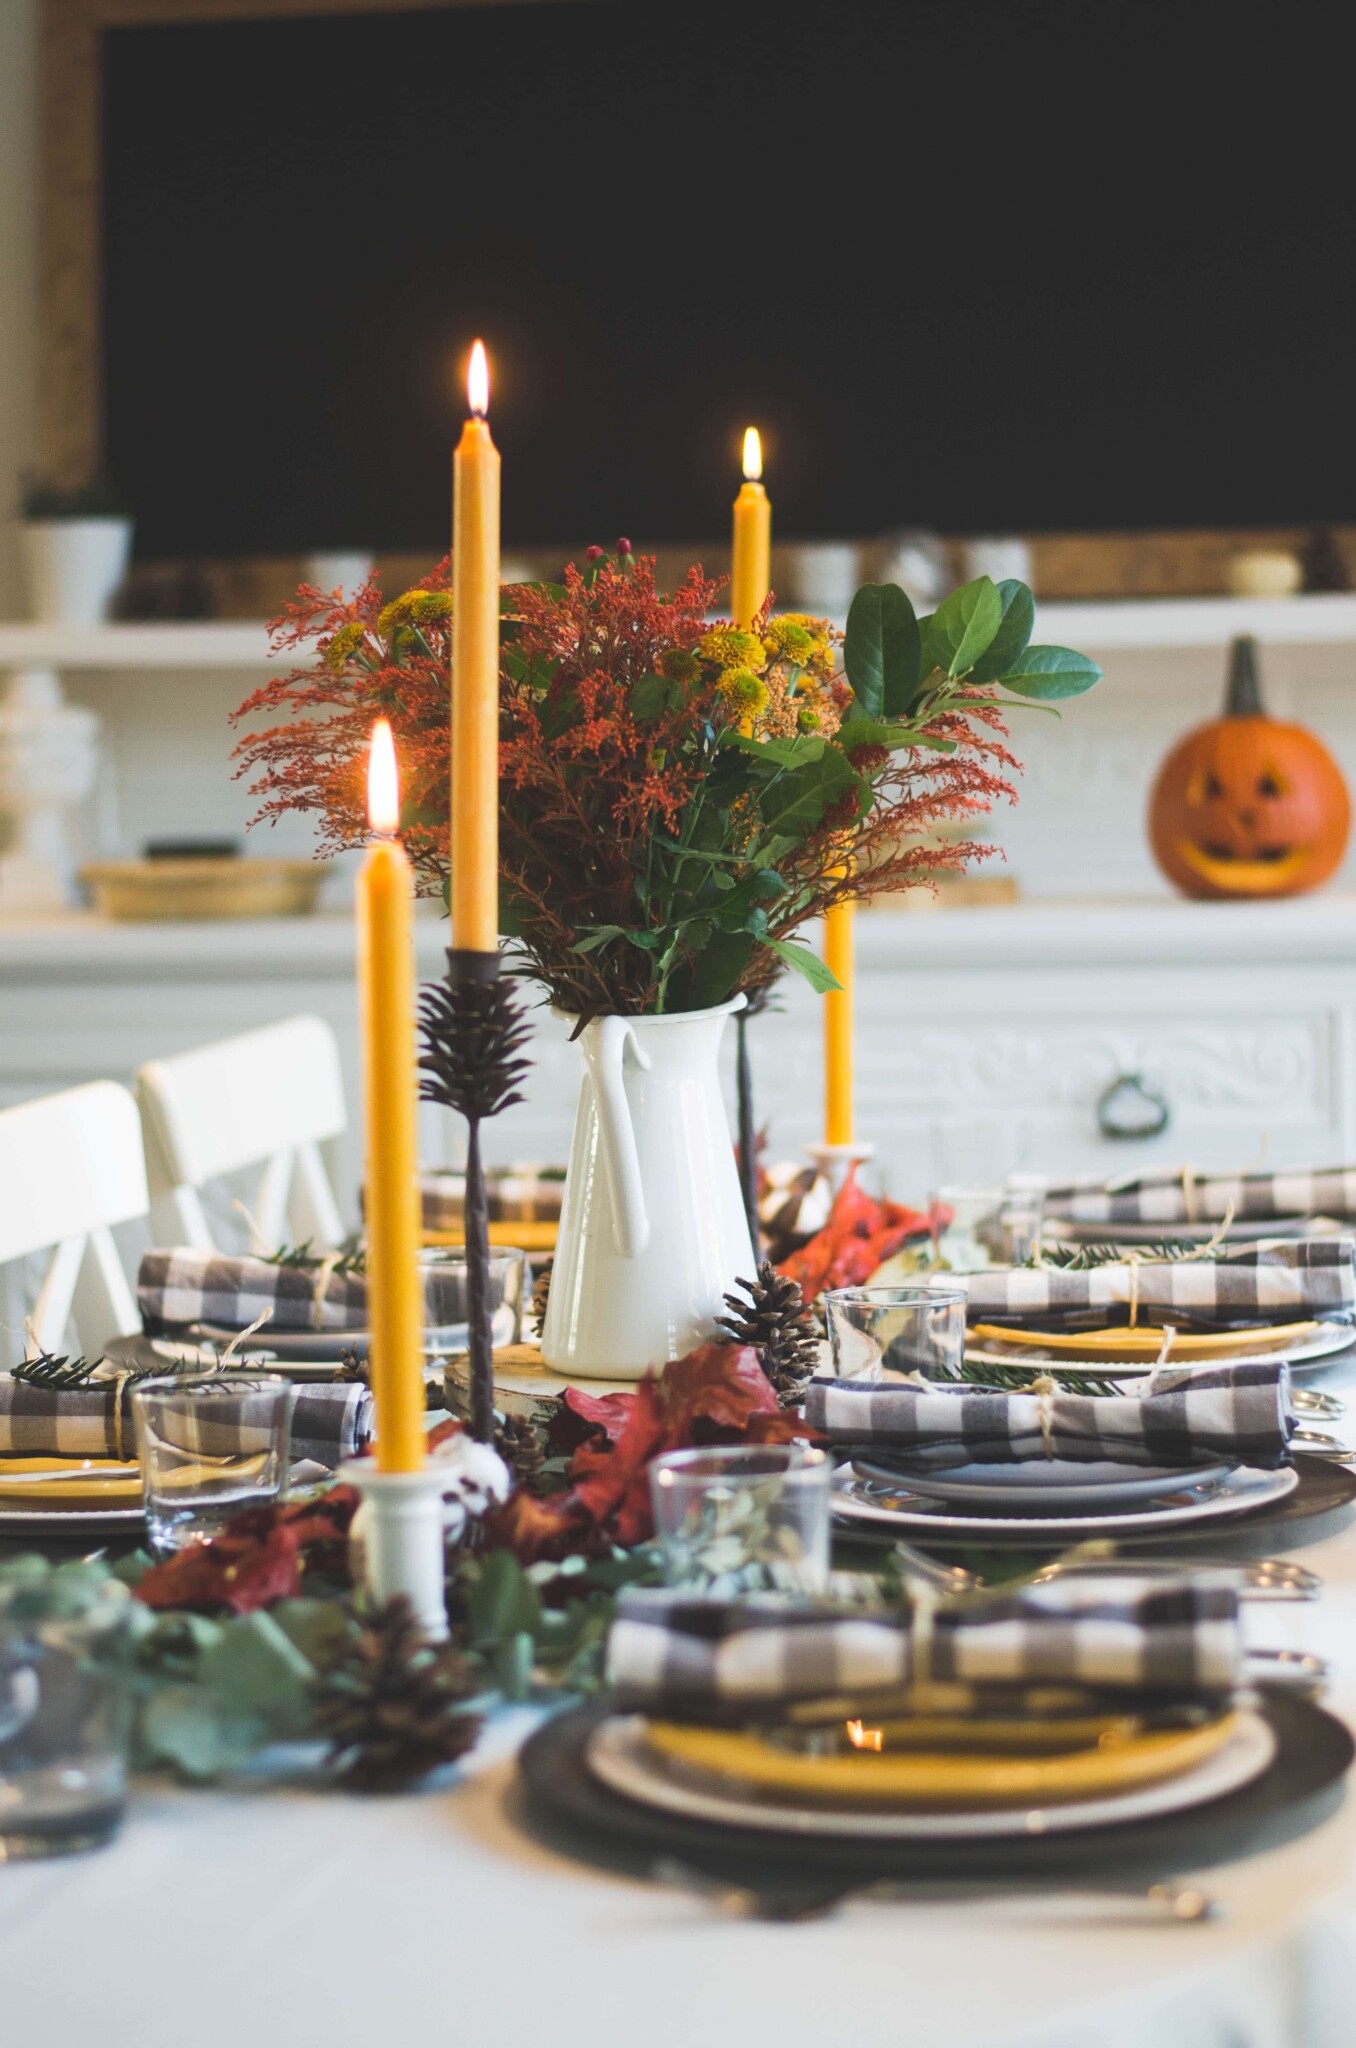 A Thanksgiving tablescape with plates, napkins, candles and seasonal flowers. Setting the table is an important part of our Thanksgiving planning guide.